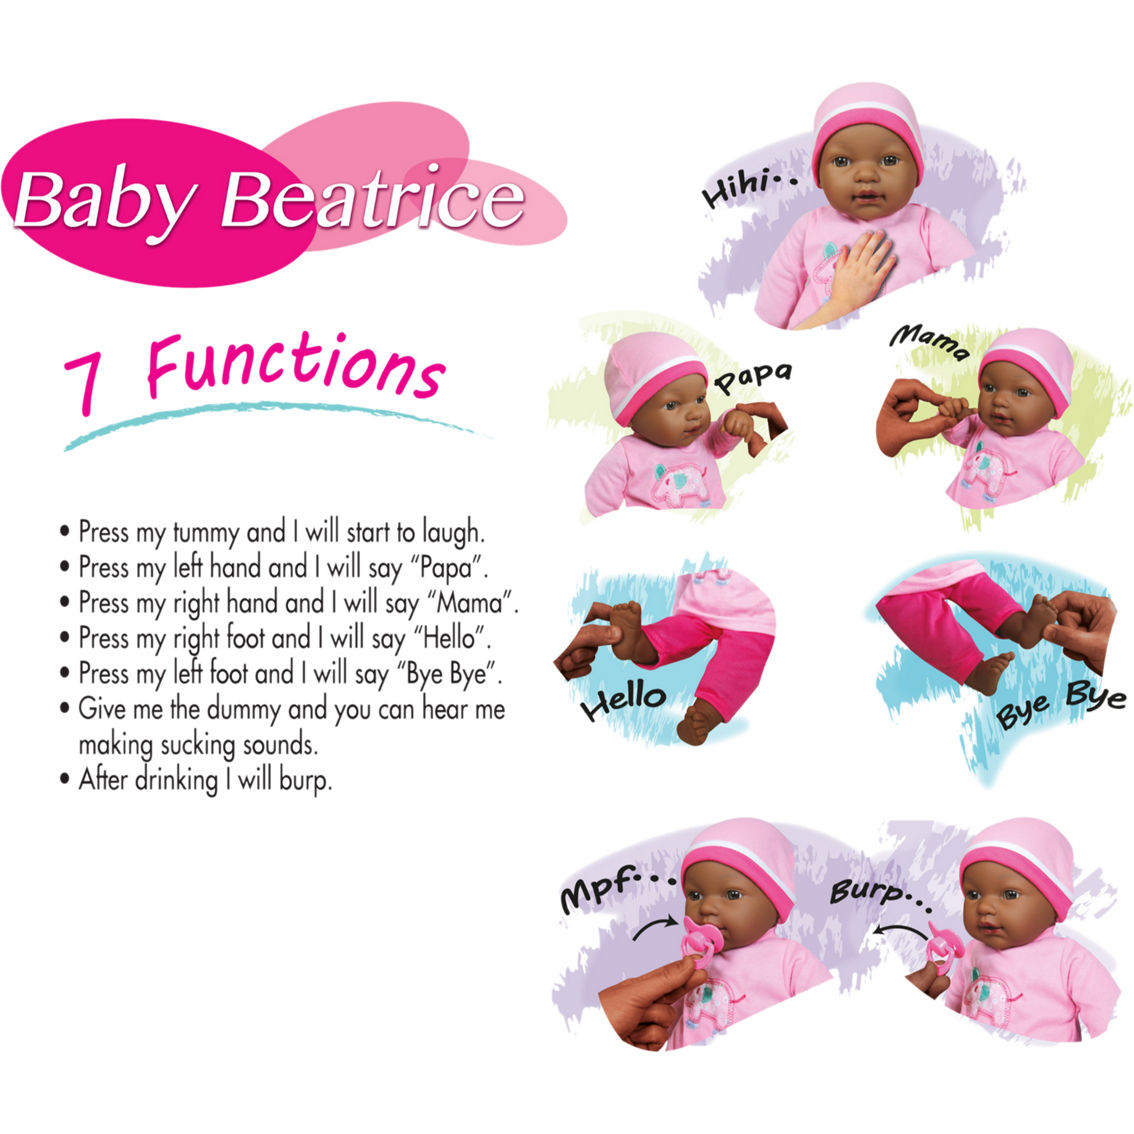 Lissi Baby Beatrice 16 in. Interactive Black Hair Baby Doll with 7 Functions - Image 3 of 3